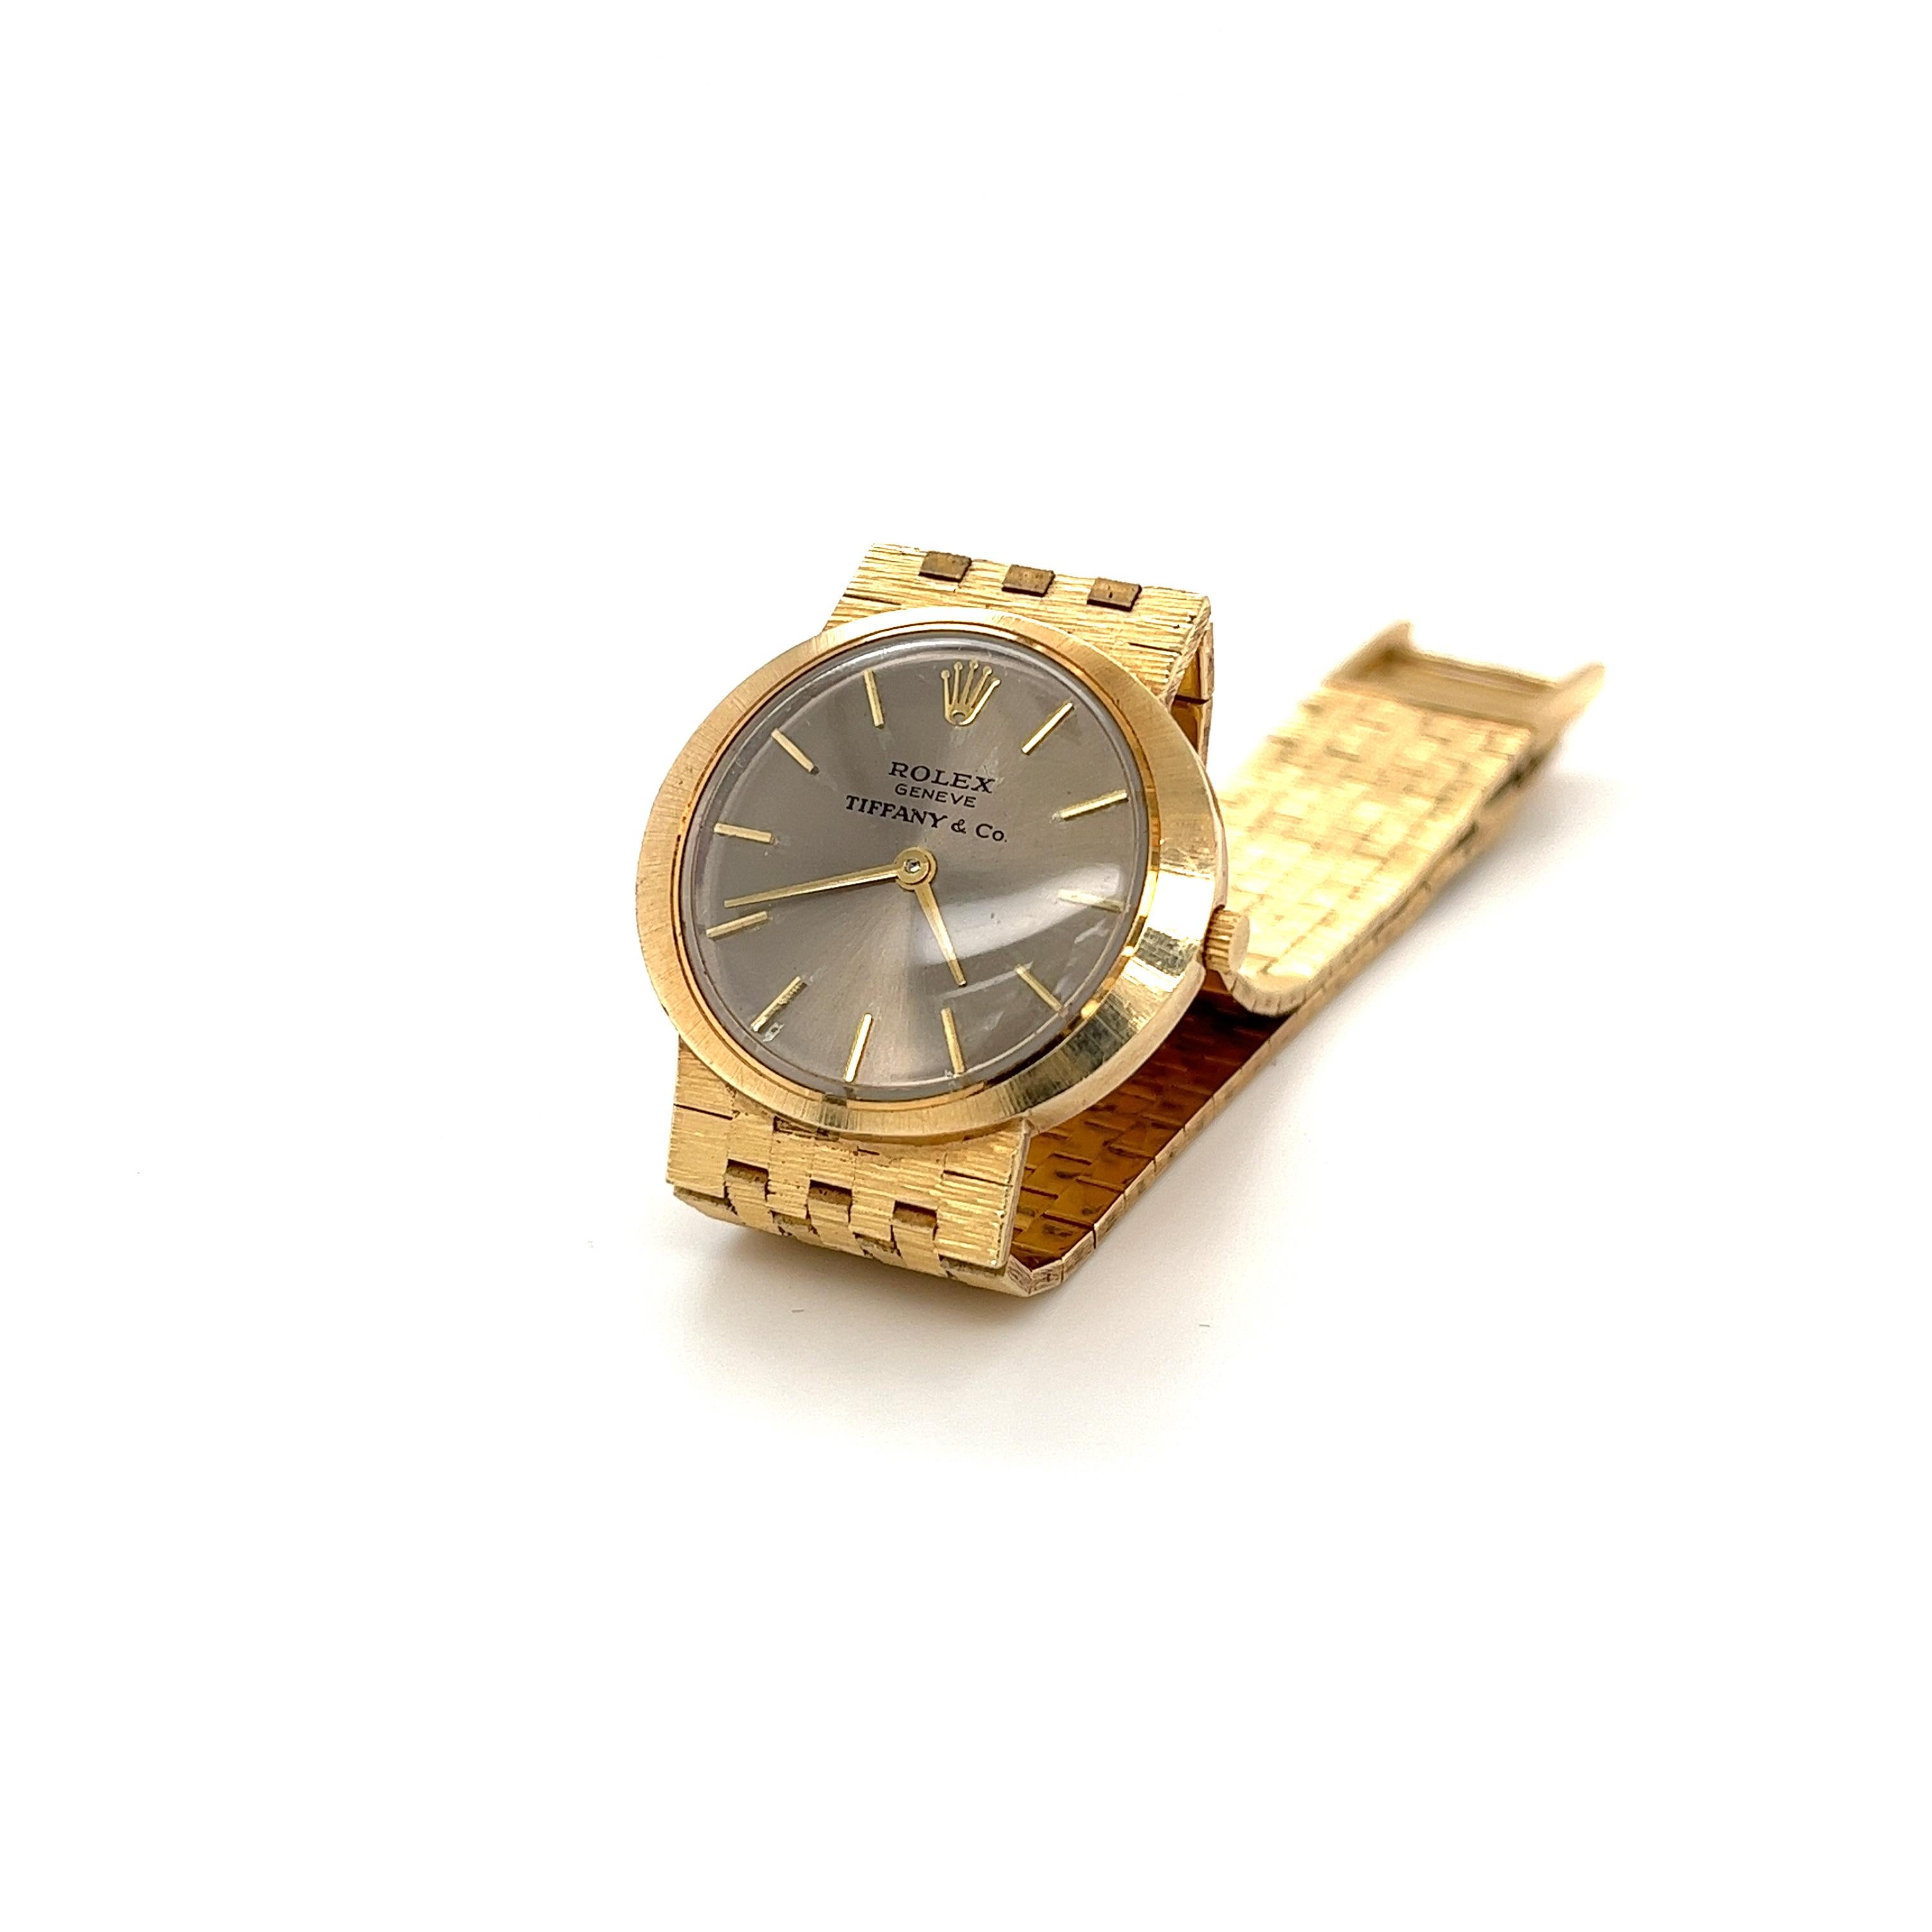 Vintage Rolex for Tiffany & Co. Ladies Watch in 14K Gold Integral Bracelet In Excellent Condition For Sale In Miami, FL